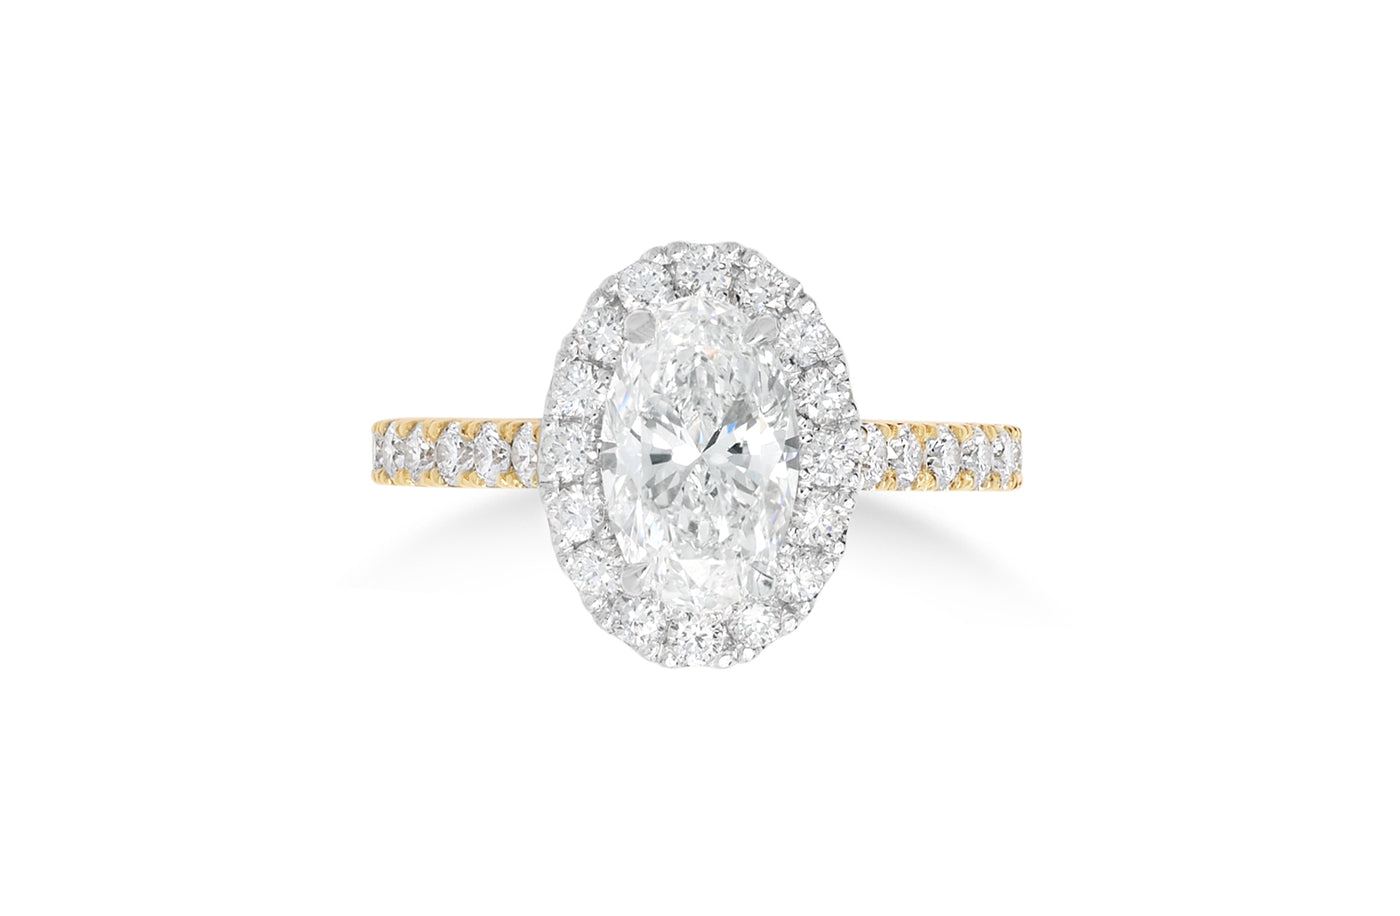 Adorn: Oval Cut Diamond Halo Ring with Diamond Set Band in Rose Gold and Platinum